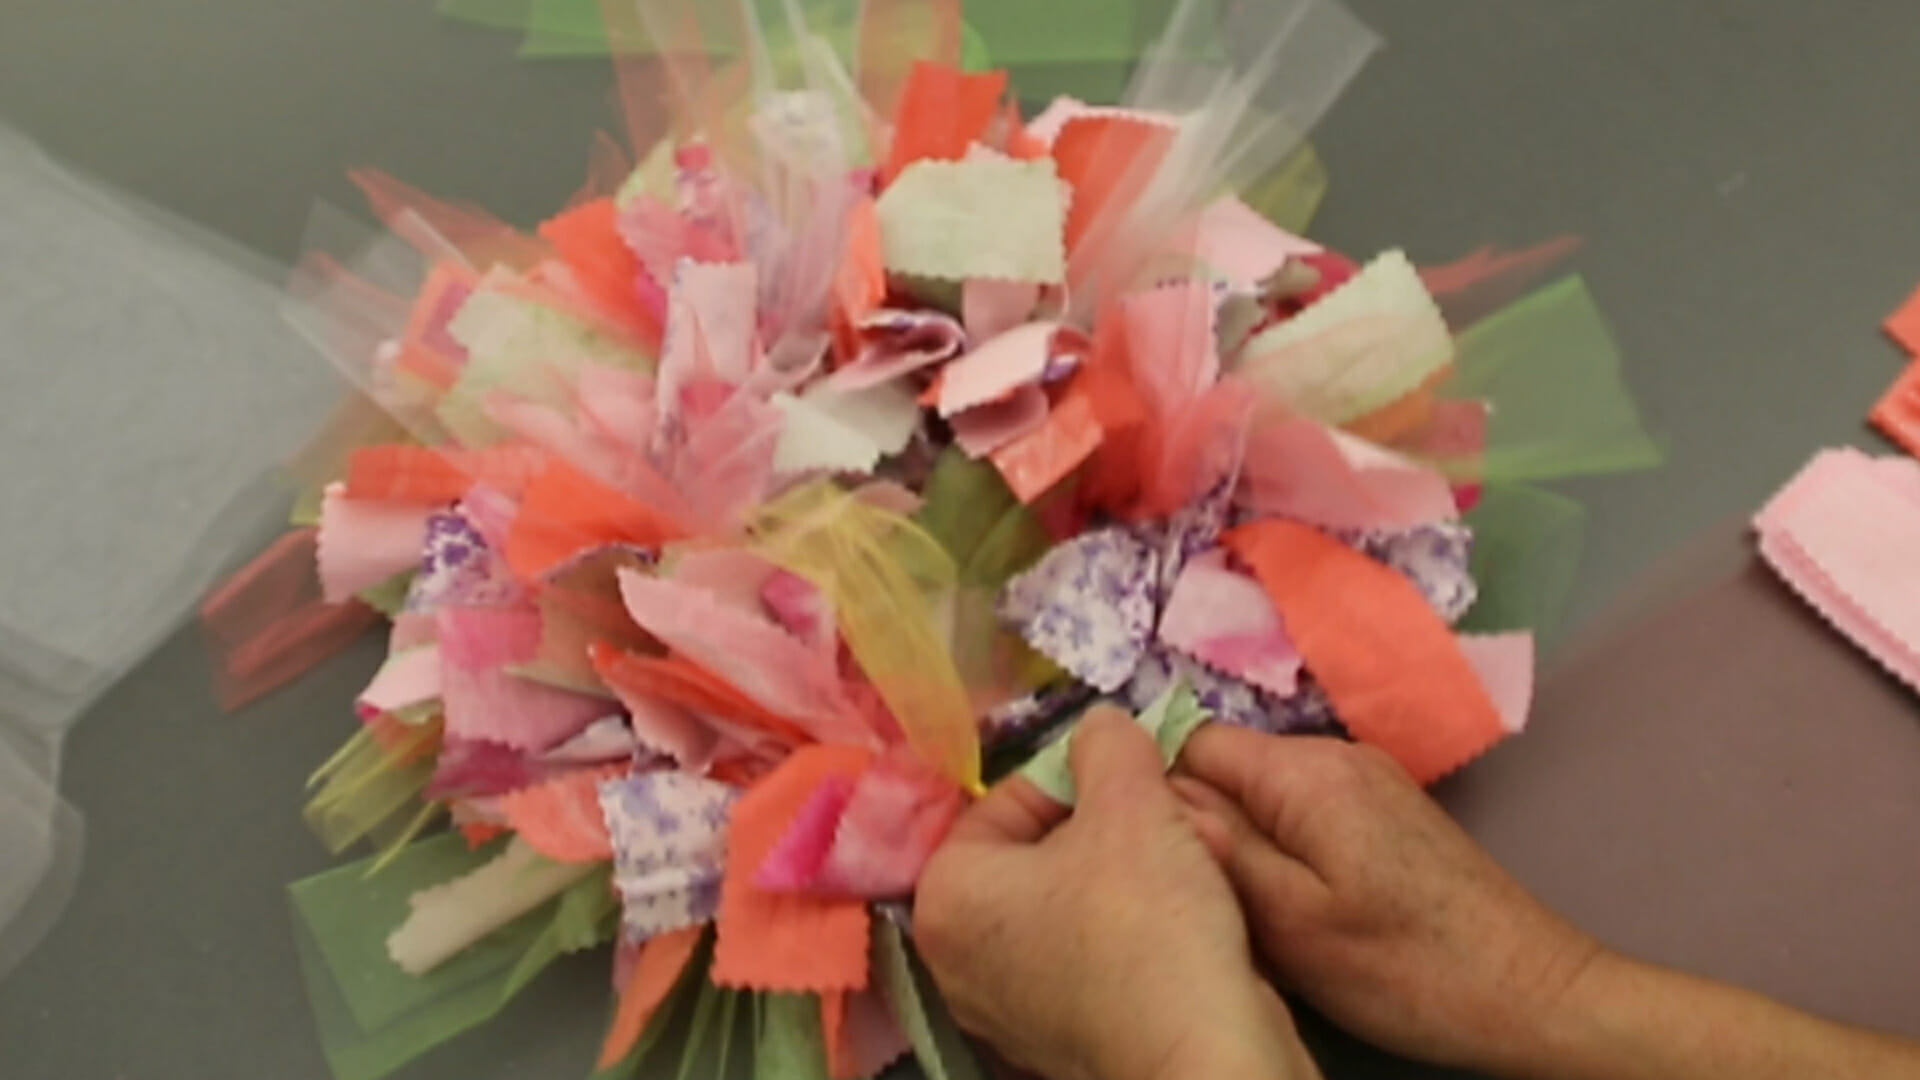 Close up view of a woman's hands assembling a colorful rag wreath.